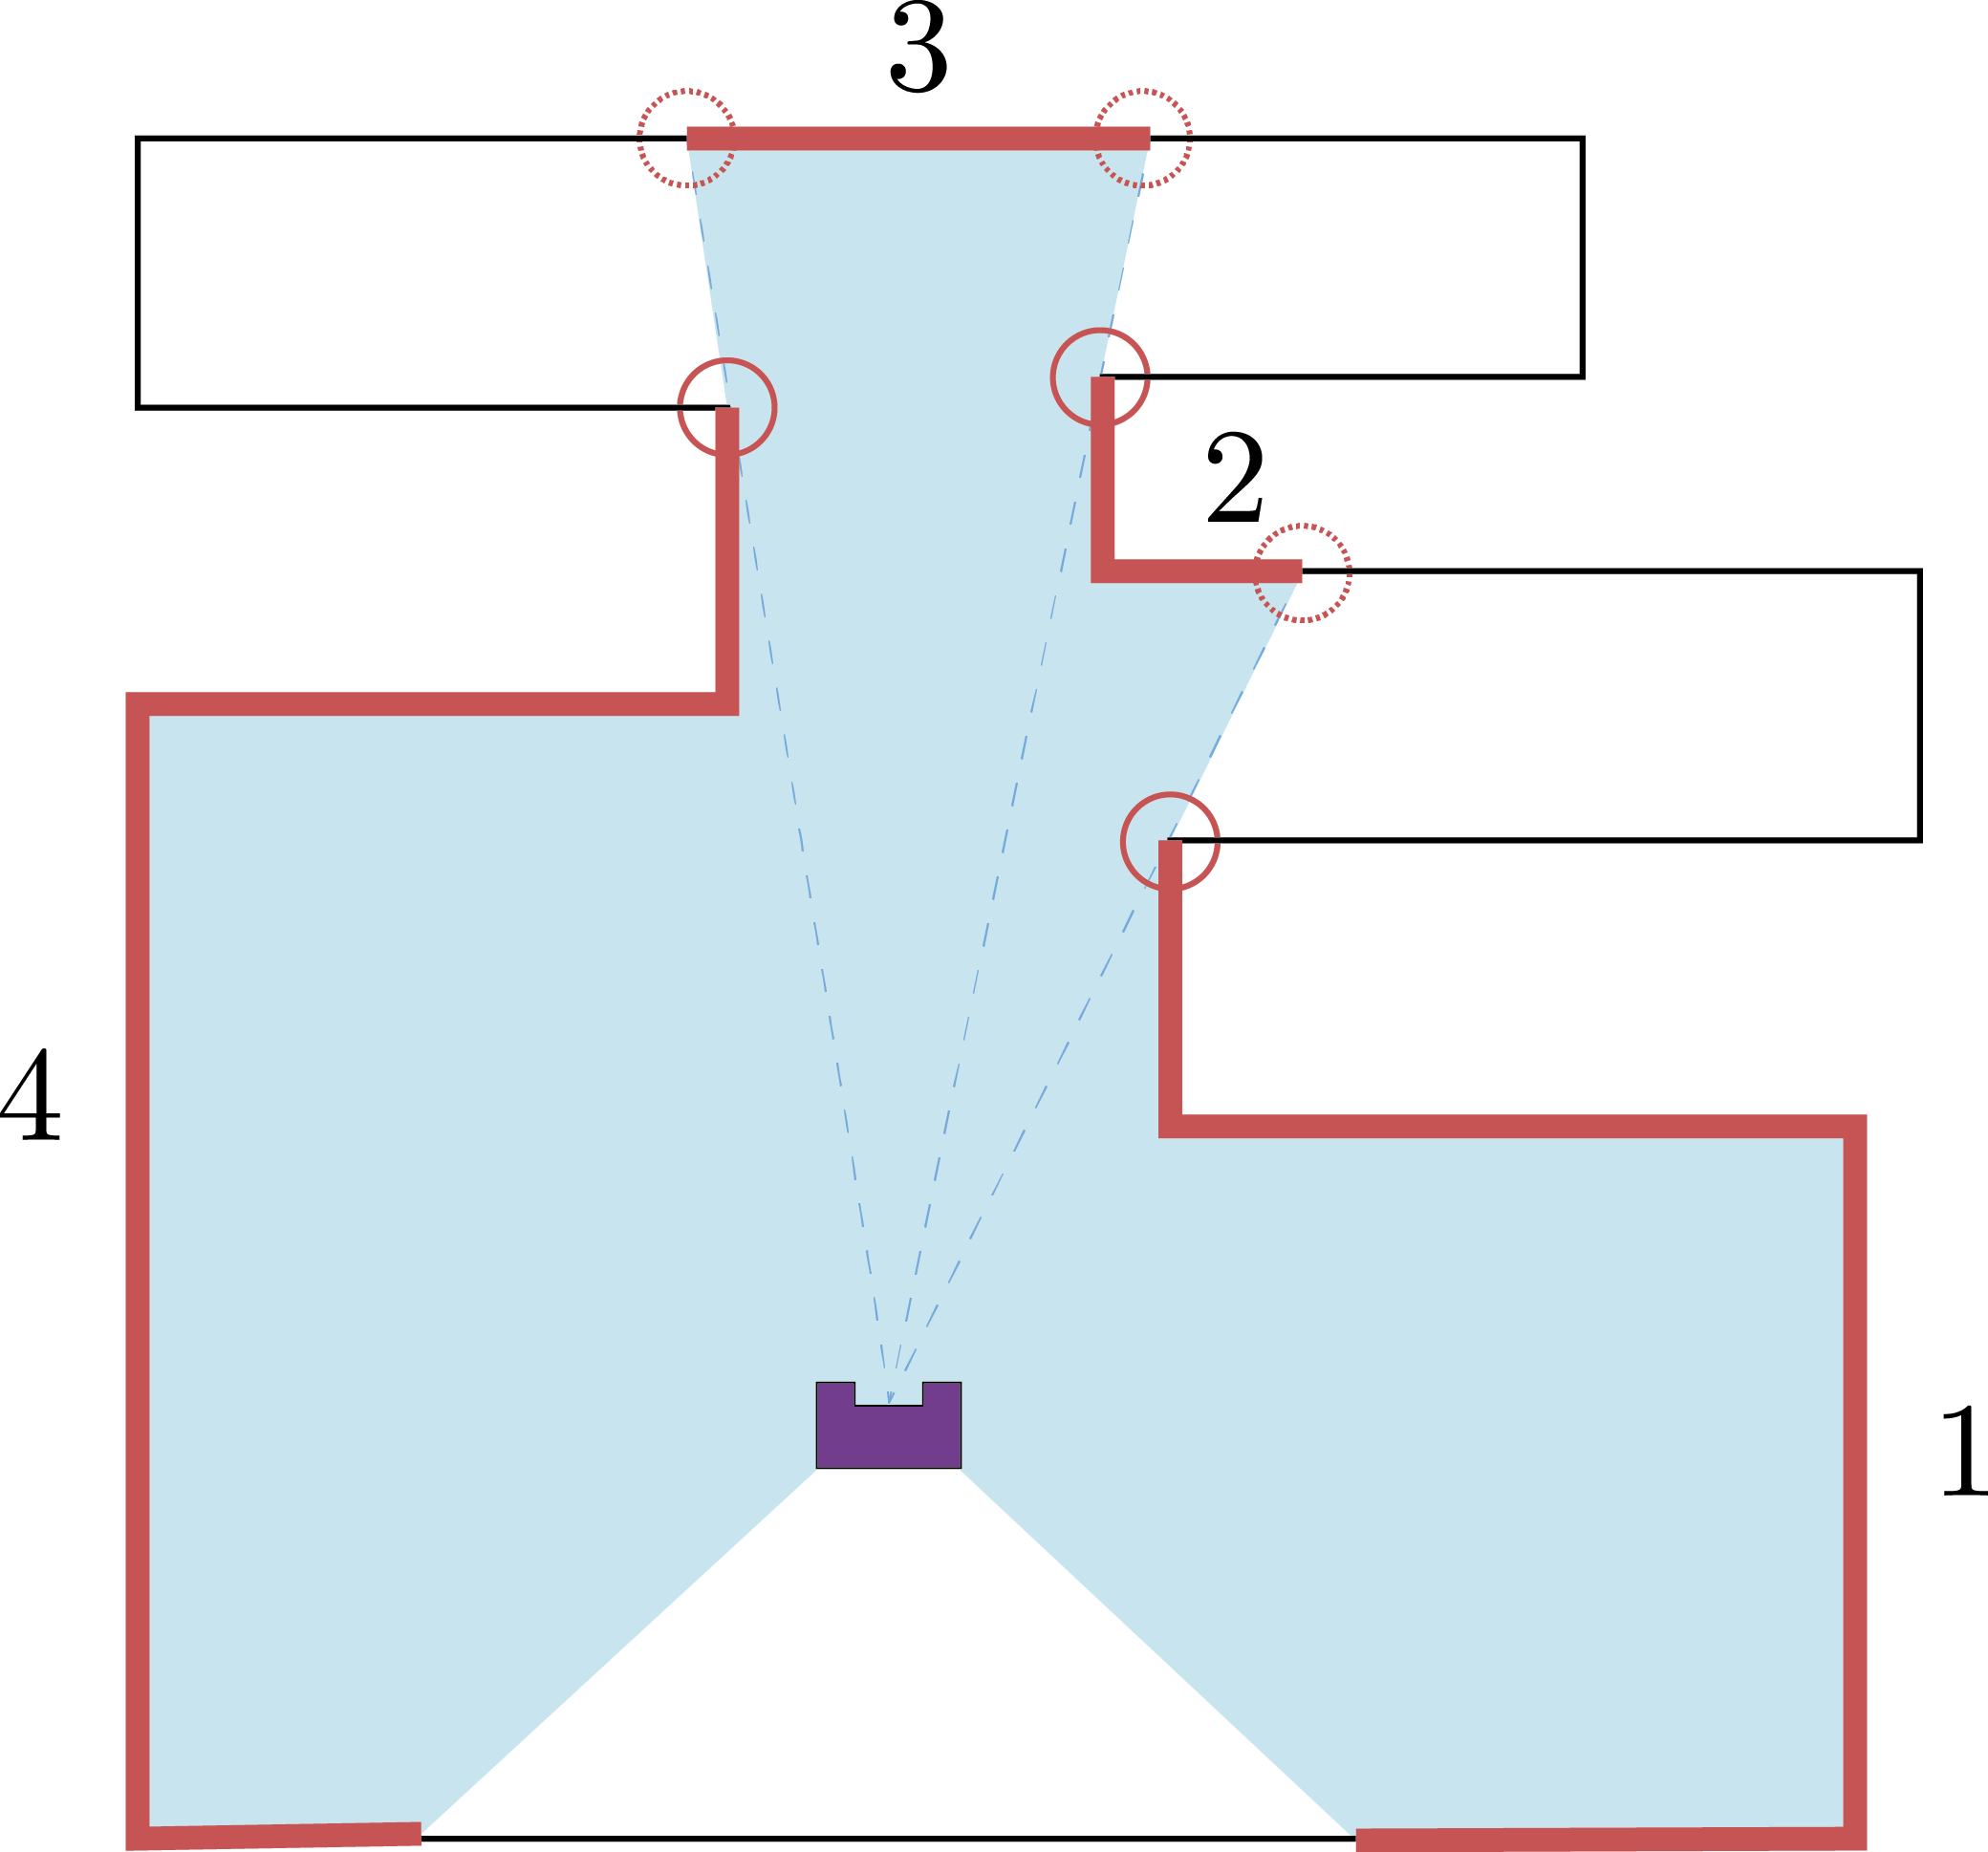 File:Virtual vertices2.png